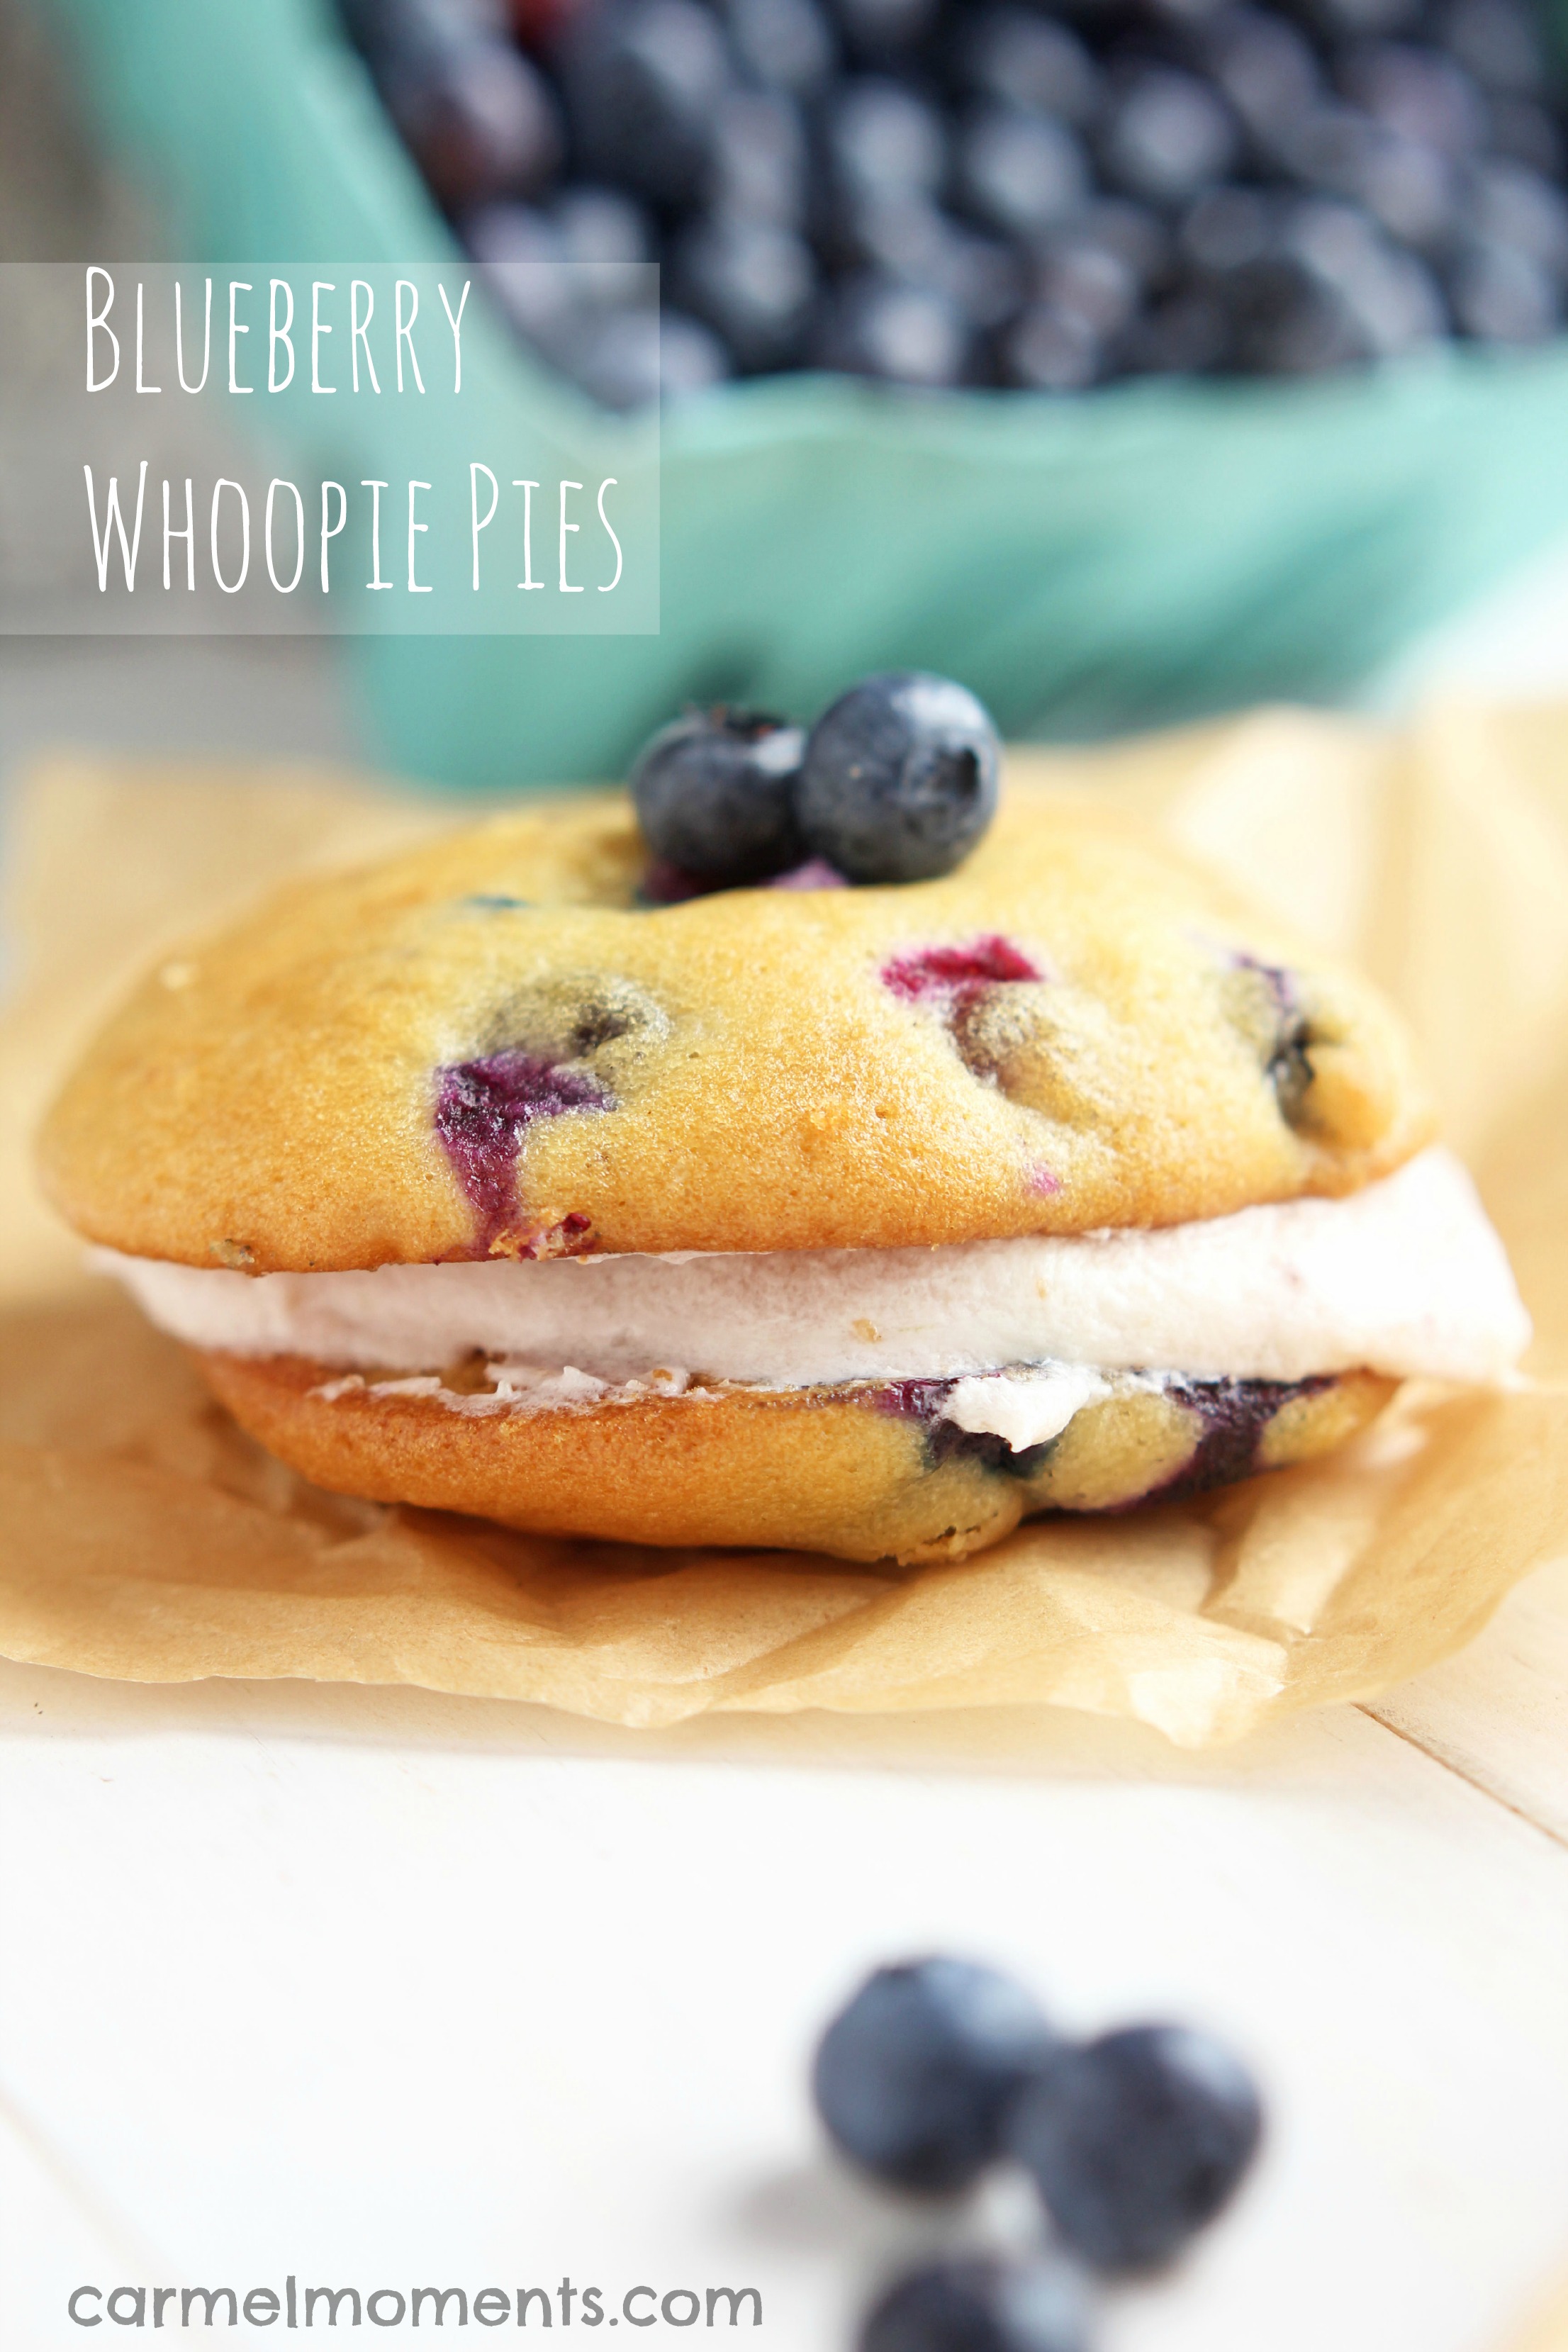 Blueberry Whoopie Pies with Whipped Blueberry Filling